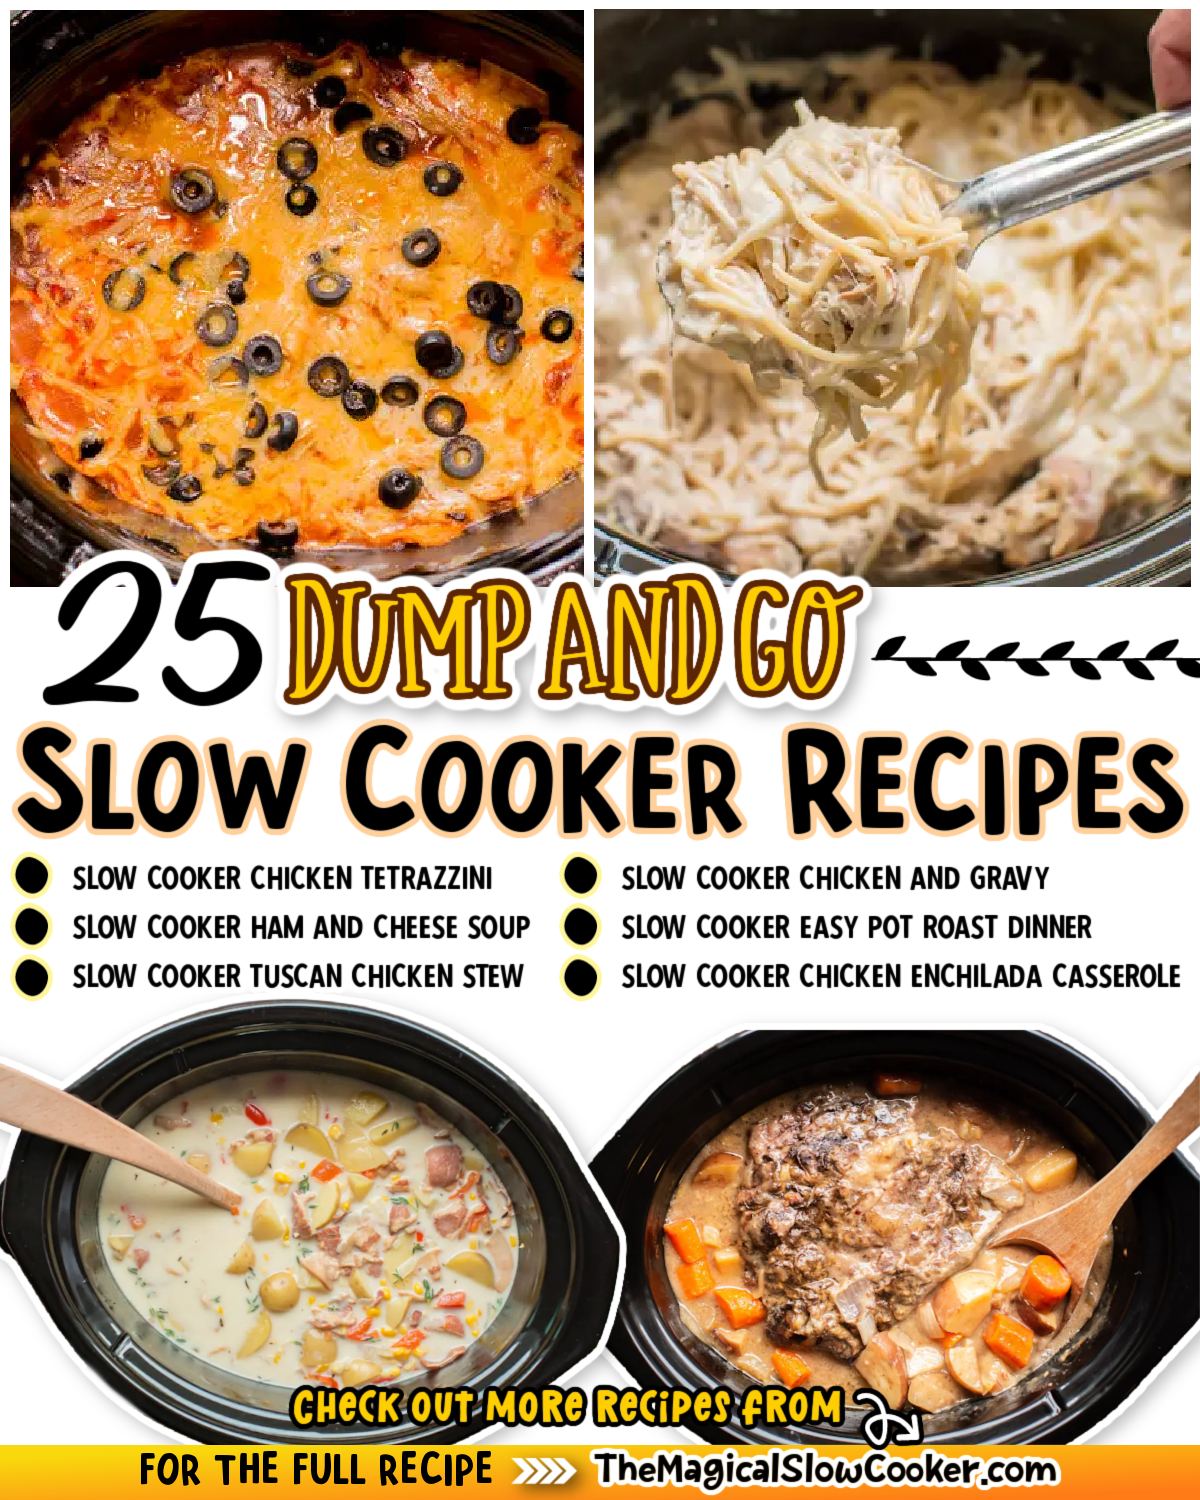 4 images of dump and go slow cooker recipes with text overlay.